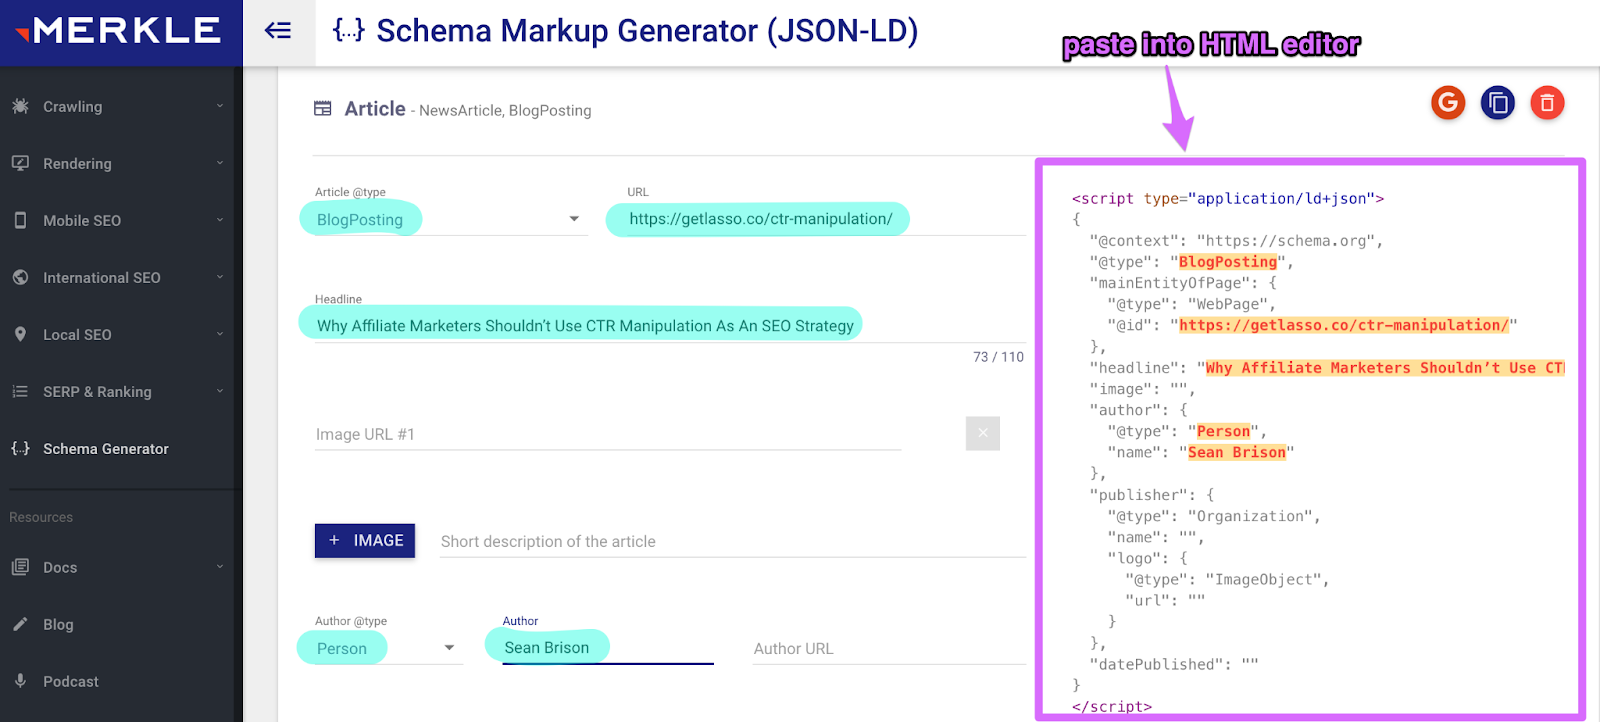 merkle Schema markup generator lets you copy and paste the code in your html editor